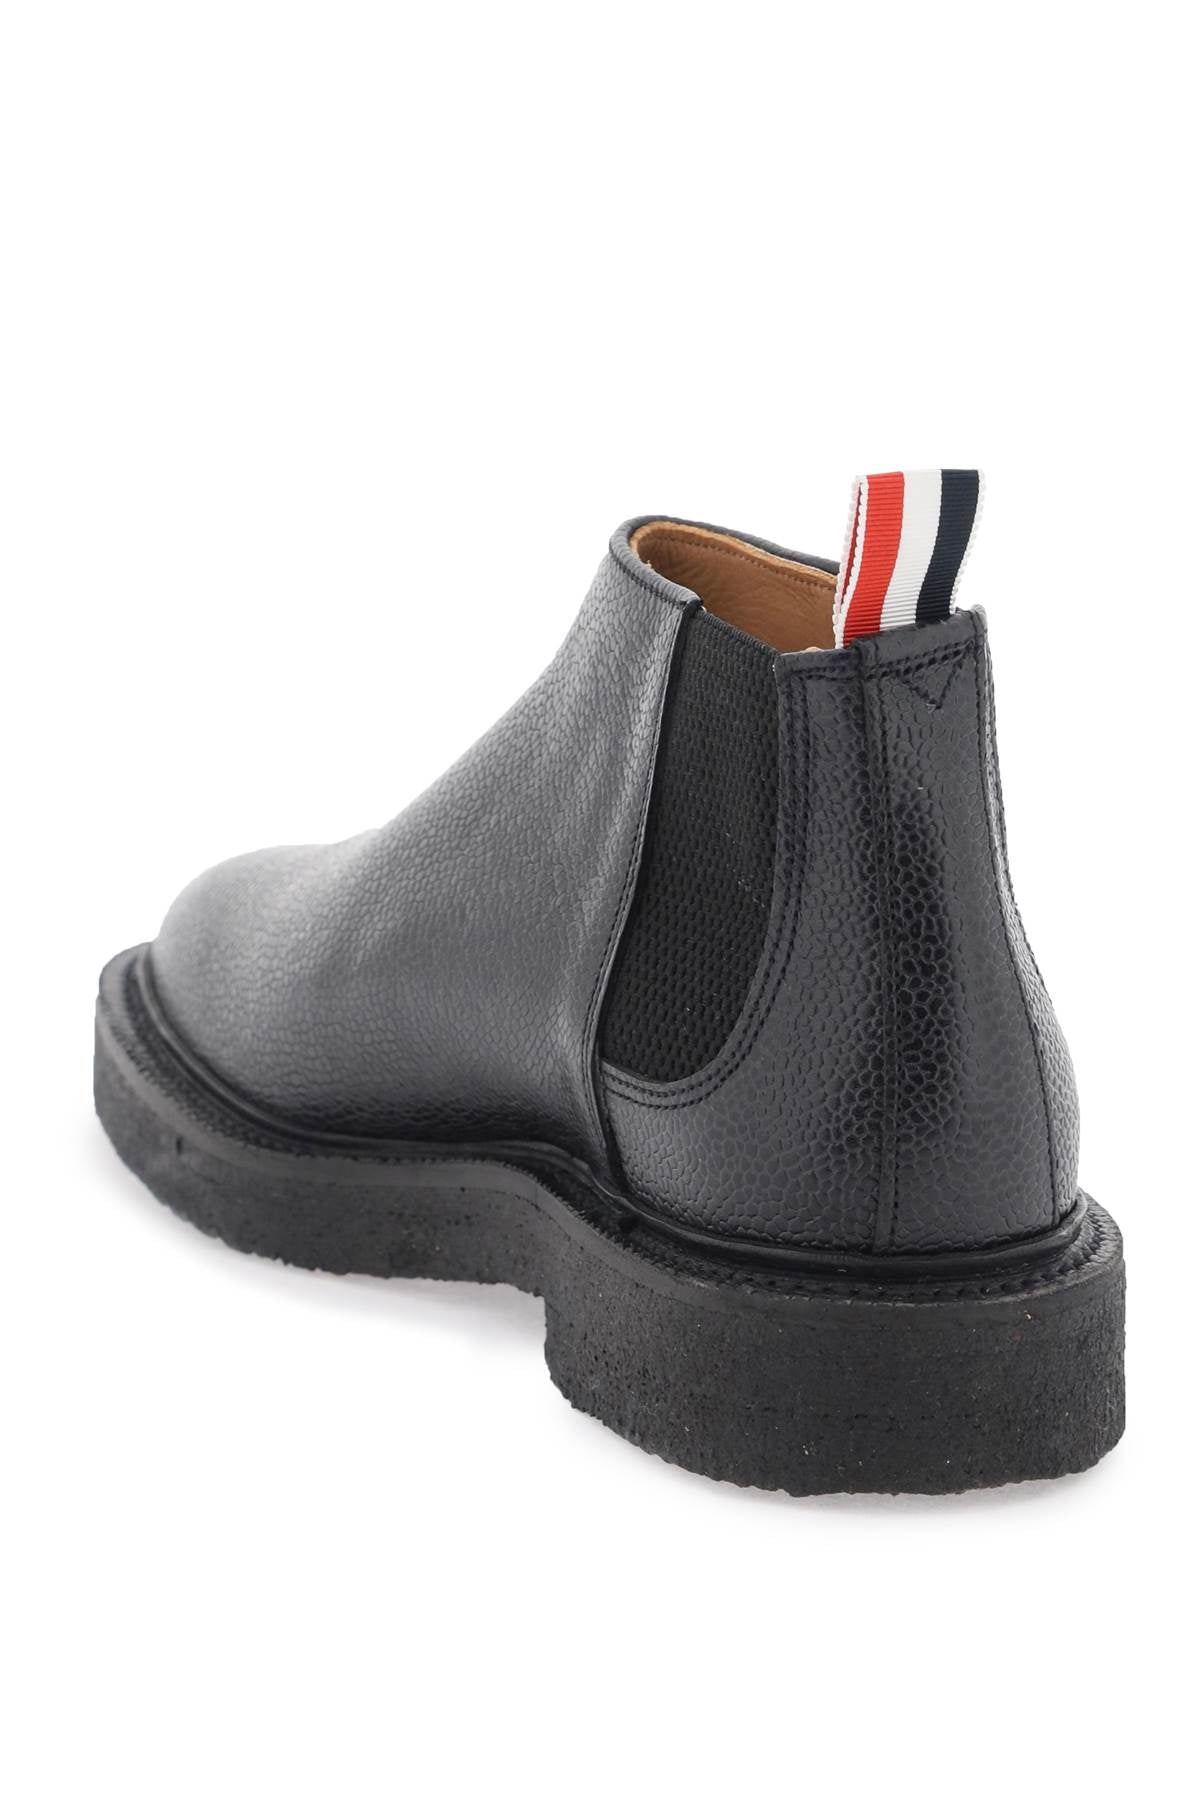 Thom Browne Thom browne mid top chelsea ankle boots